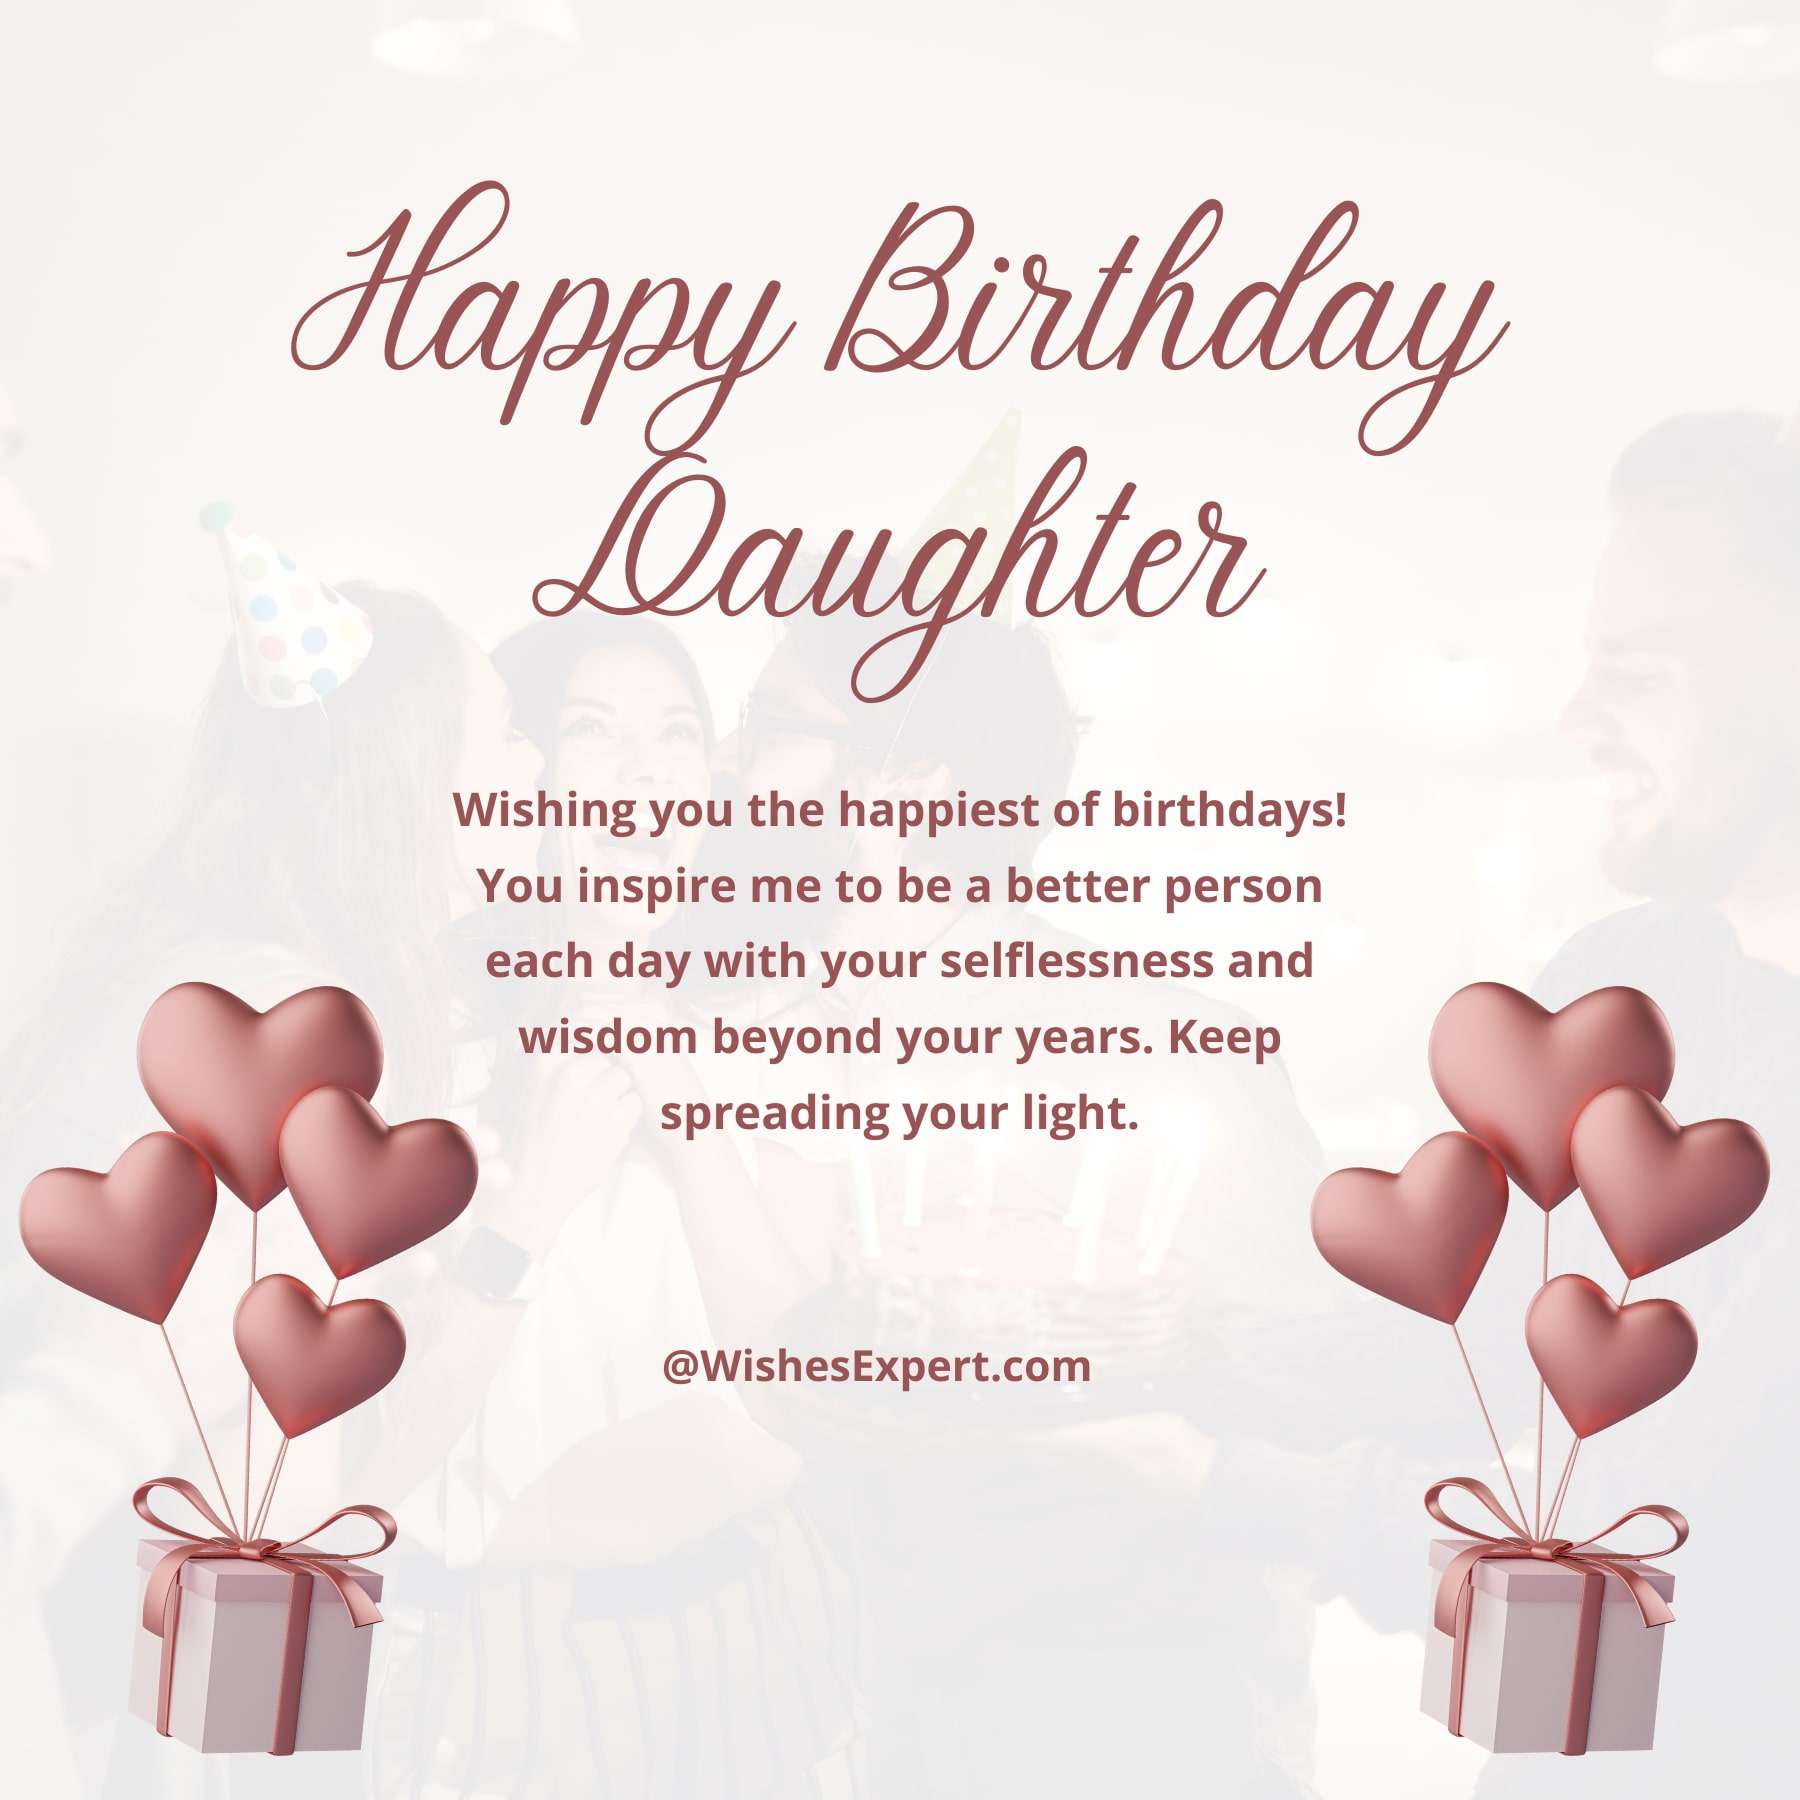 Inspirational-21st-birthday-Wishes-for-Daughter